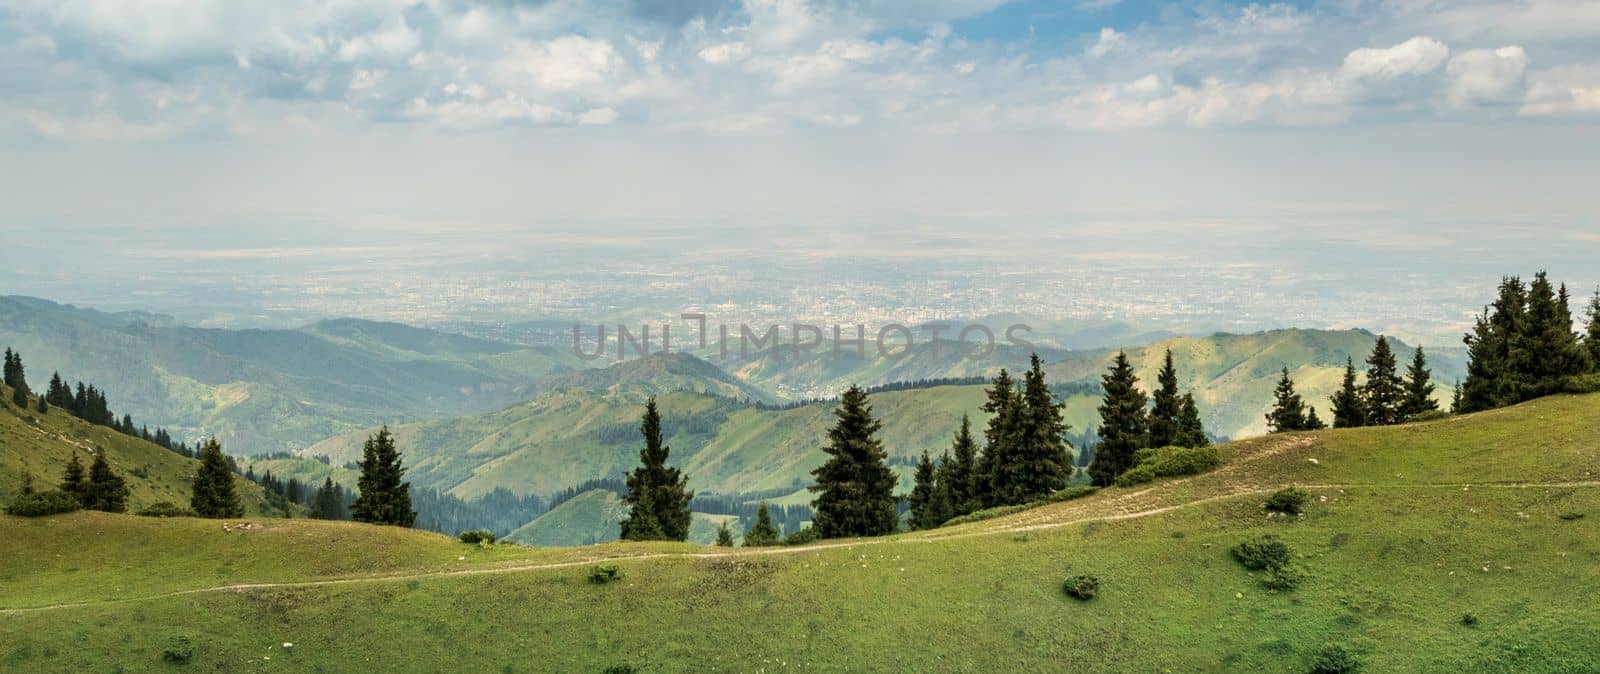 Panoramic view of the city of Almaty from the tops of the Almaty mountains. Tourist natural places of Kazakhstan, copy space.